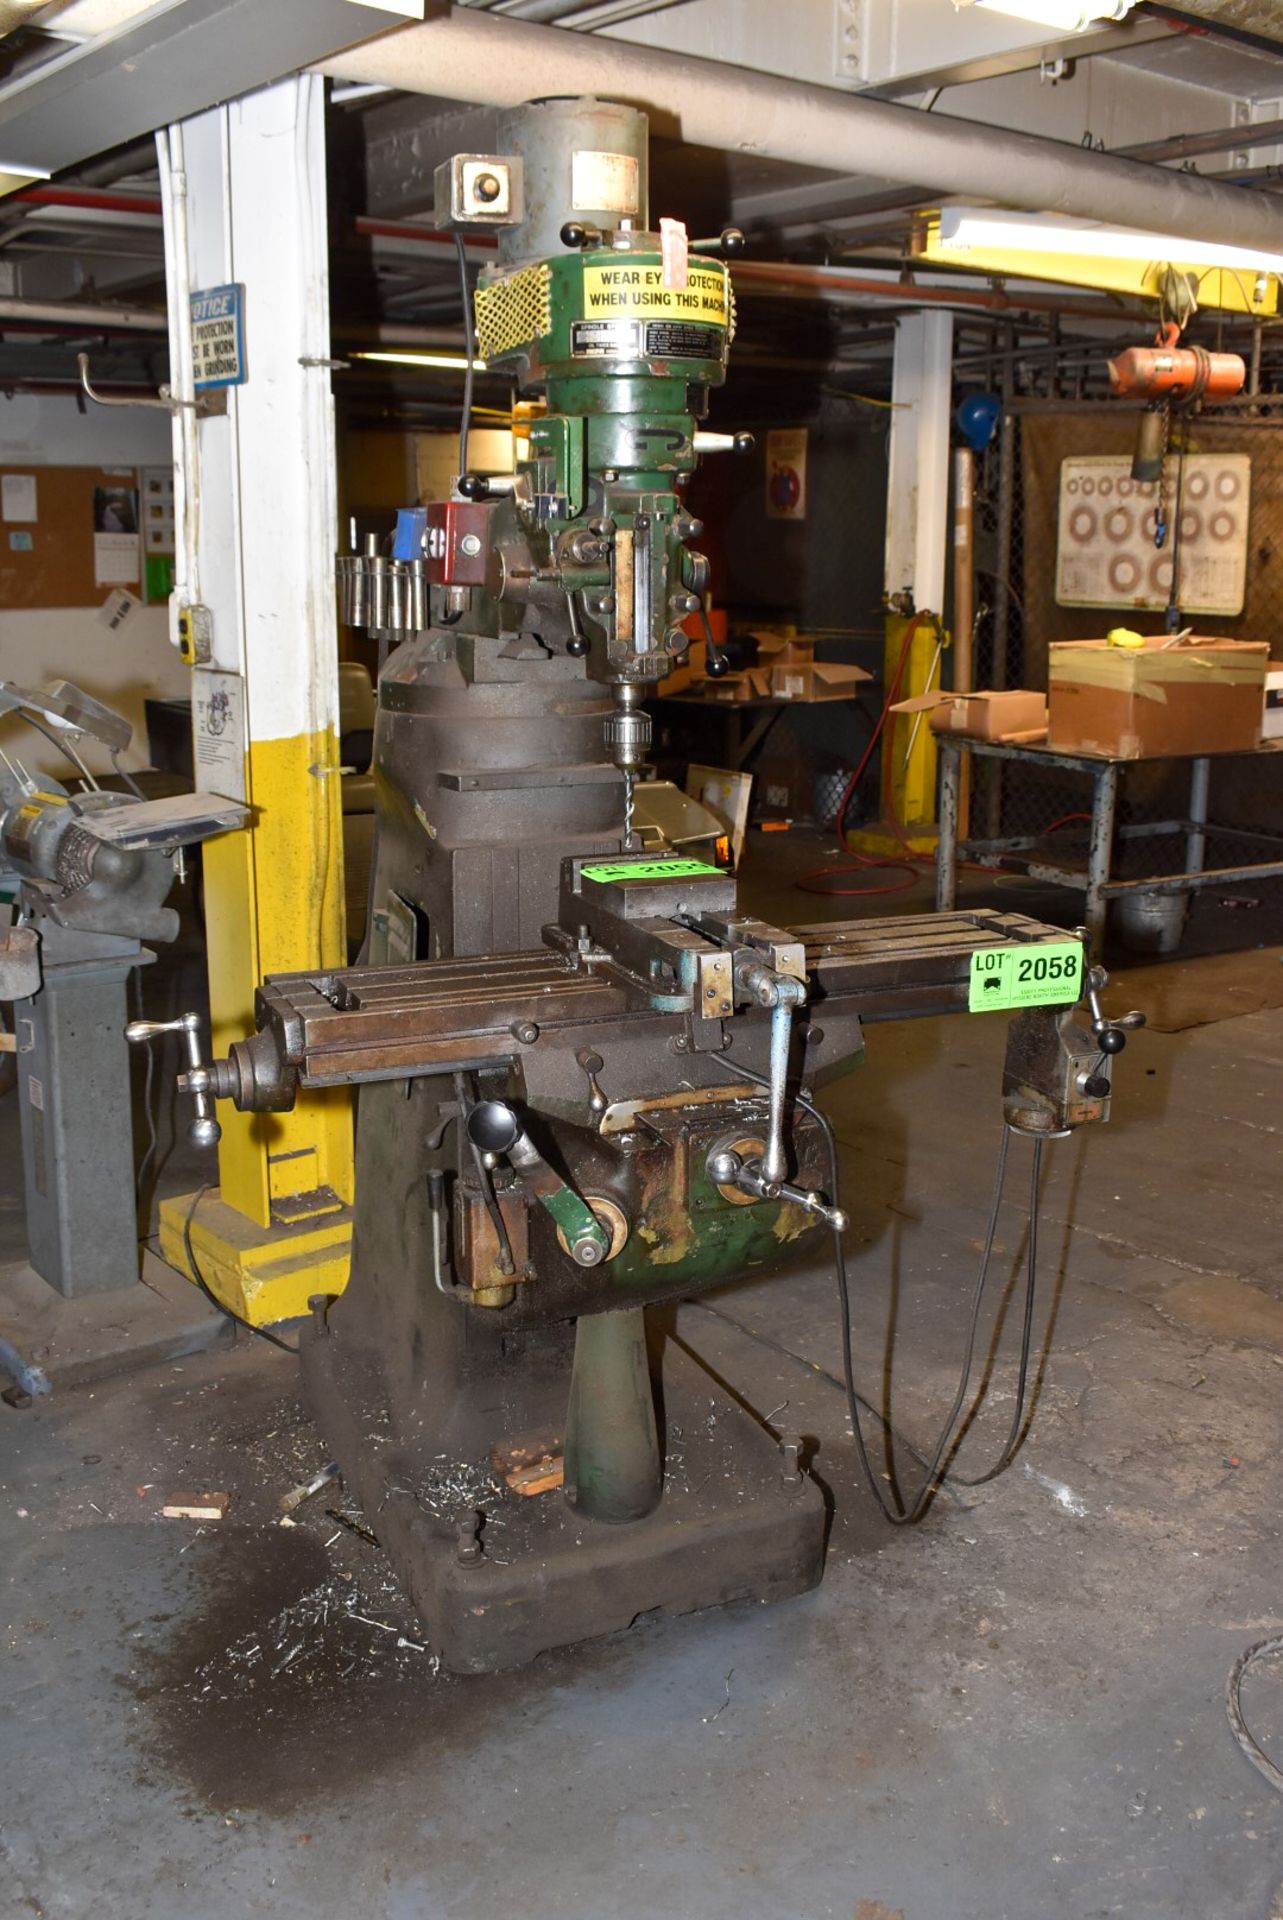 DEKAMILL JS-2V VERTICAL TURRET MILLING MACHINE WITH 9" X 49" TABLE, SPEEDS TO 2720 RPM, R8 SPINDLE - Image 2 of 6